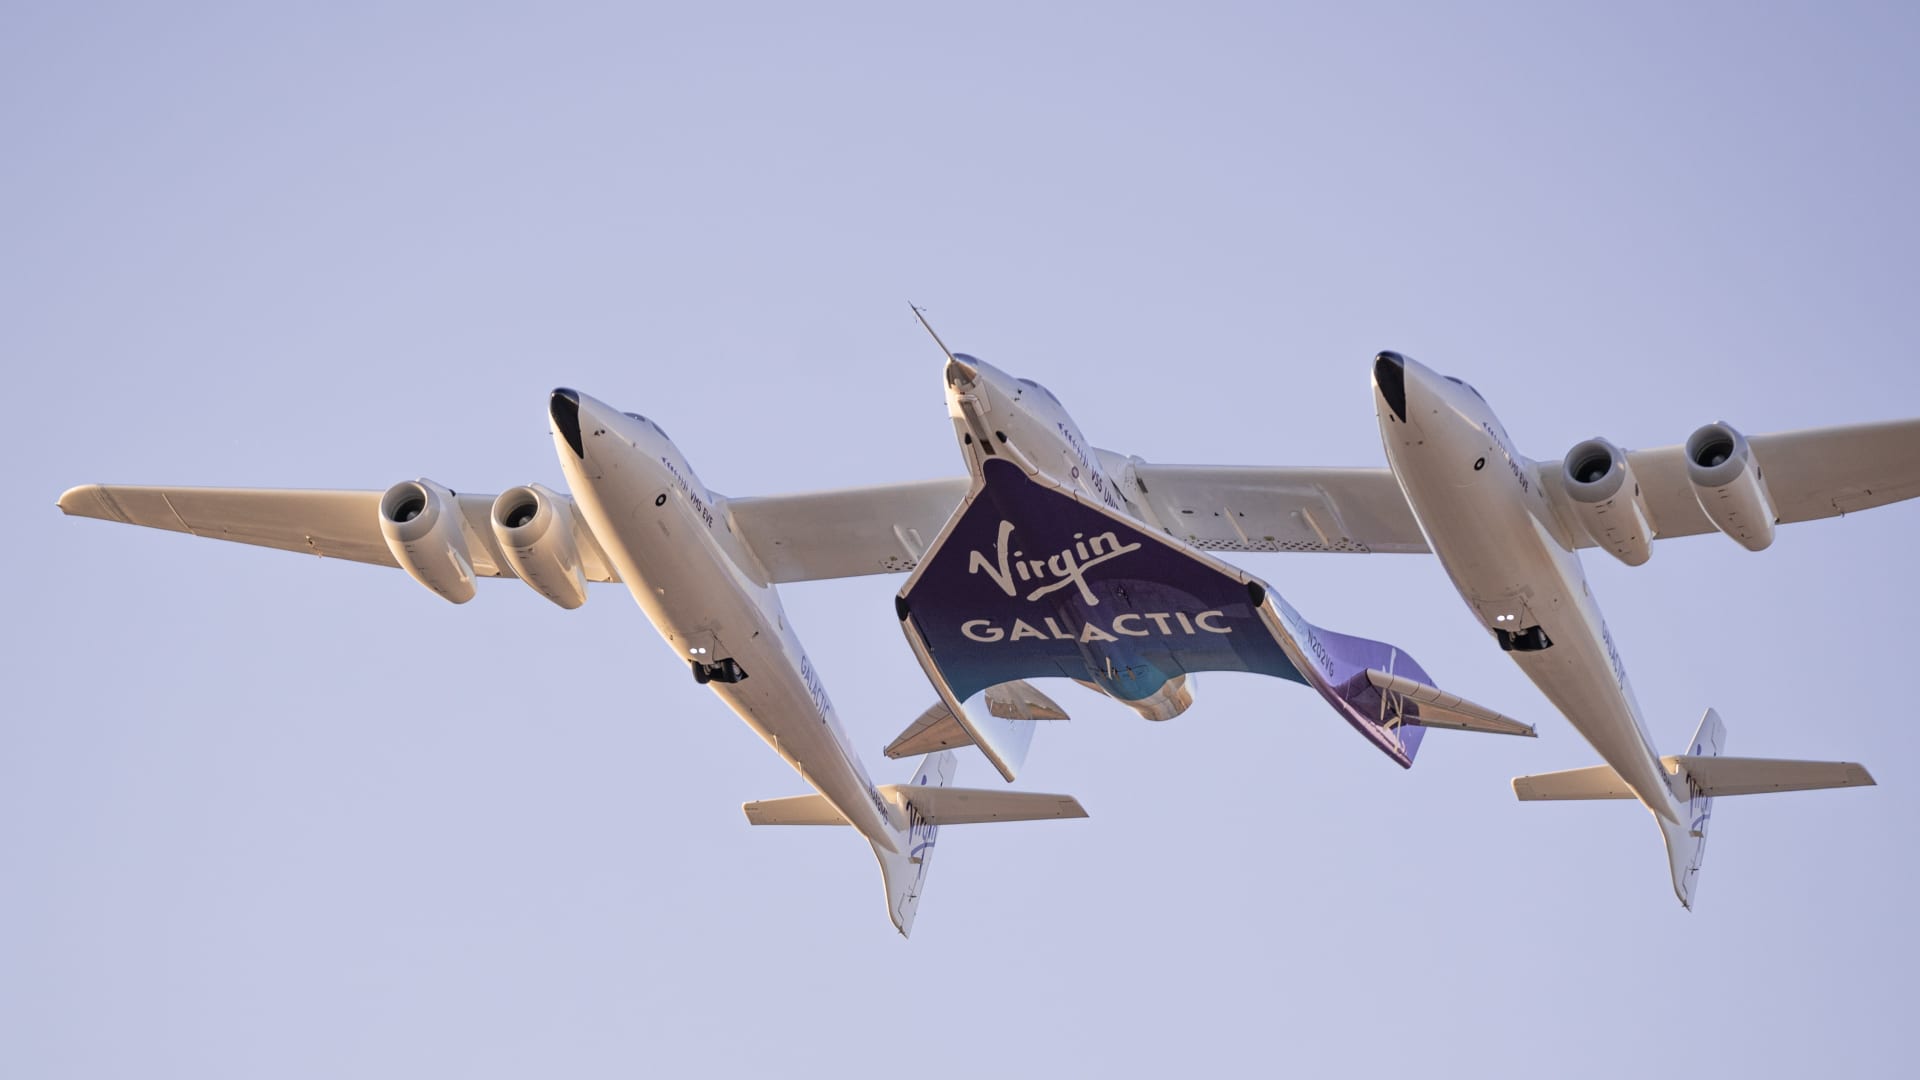 Virgin Galactic attempts final test flight before beginning ticketed space trips